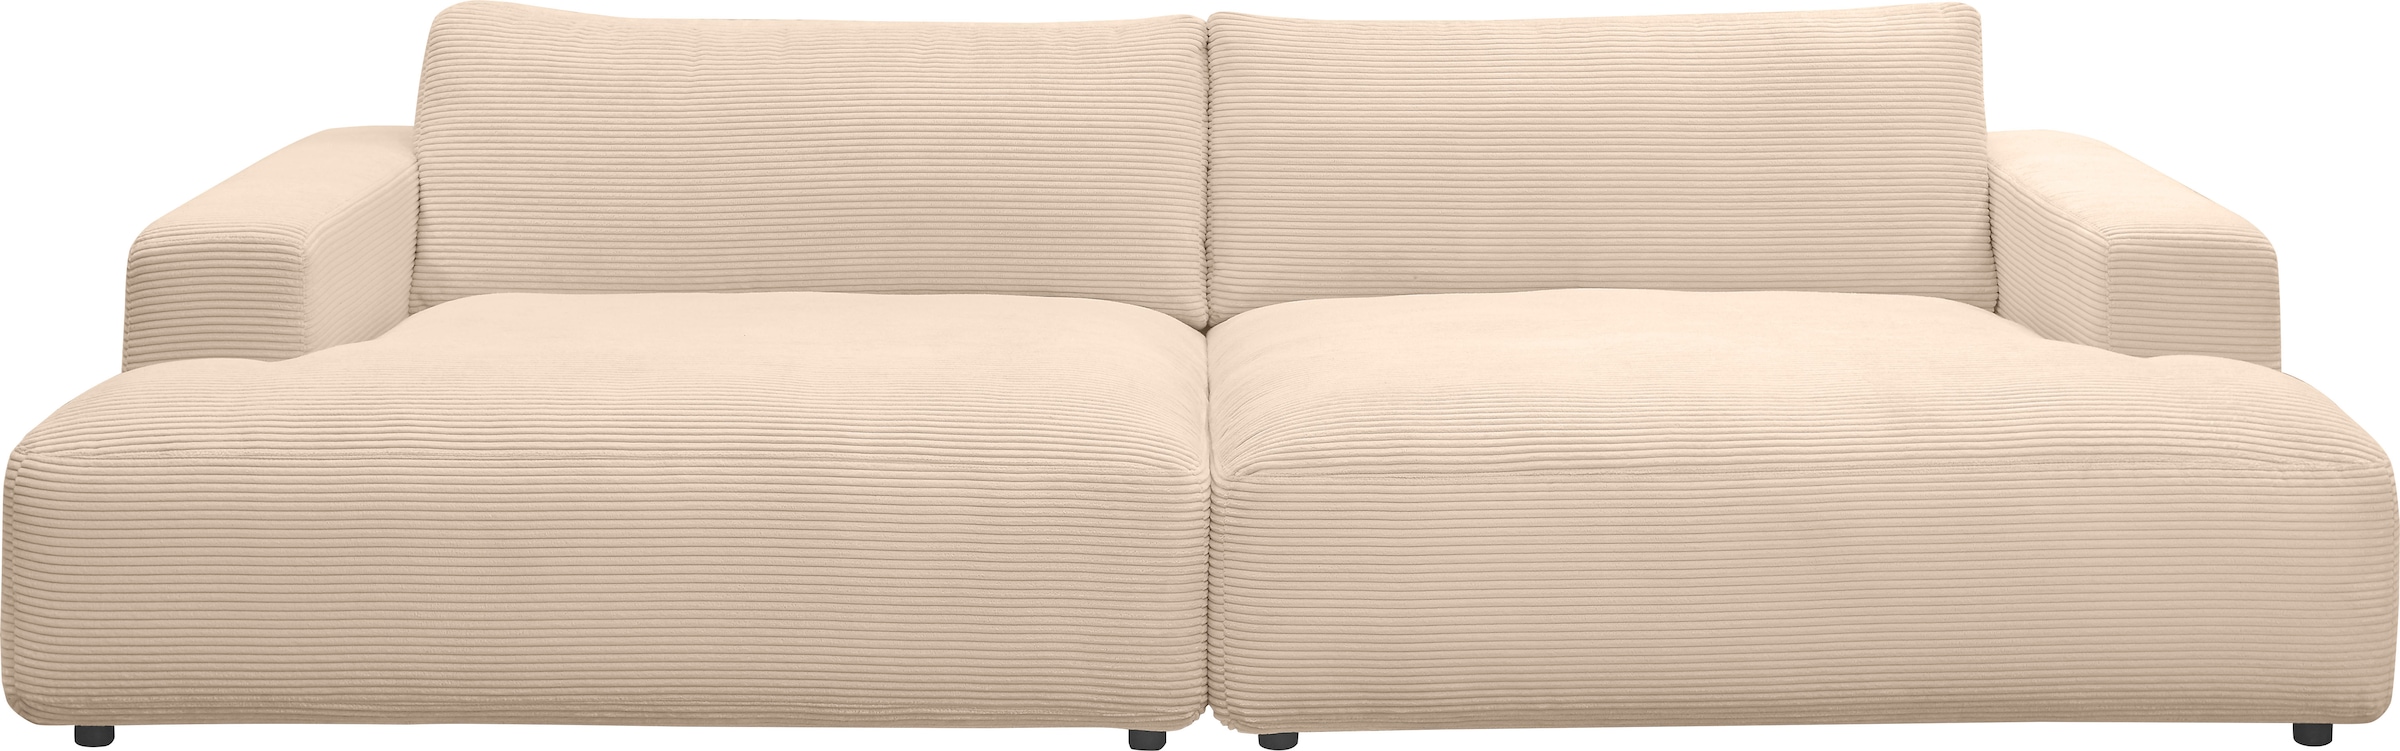 GALLERY M branded by Musterring Loungesofa bequem kaufen 292 »Lucia«, Breite cm Cord-Bezug